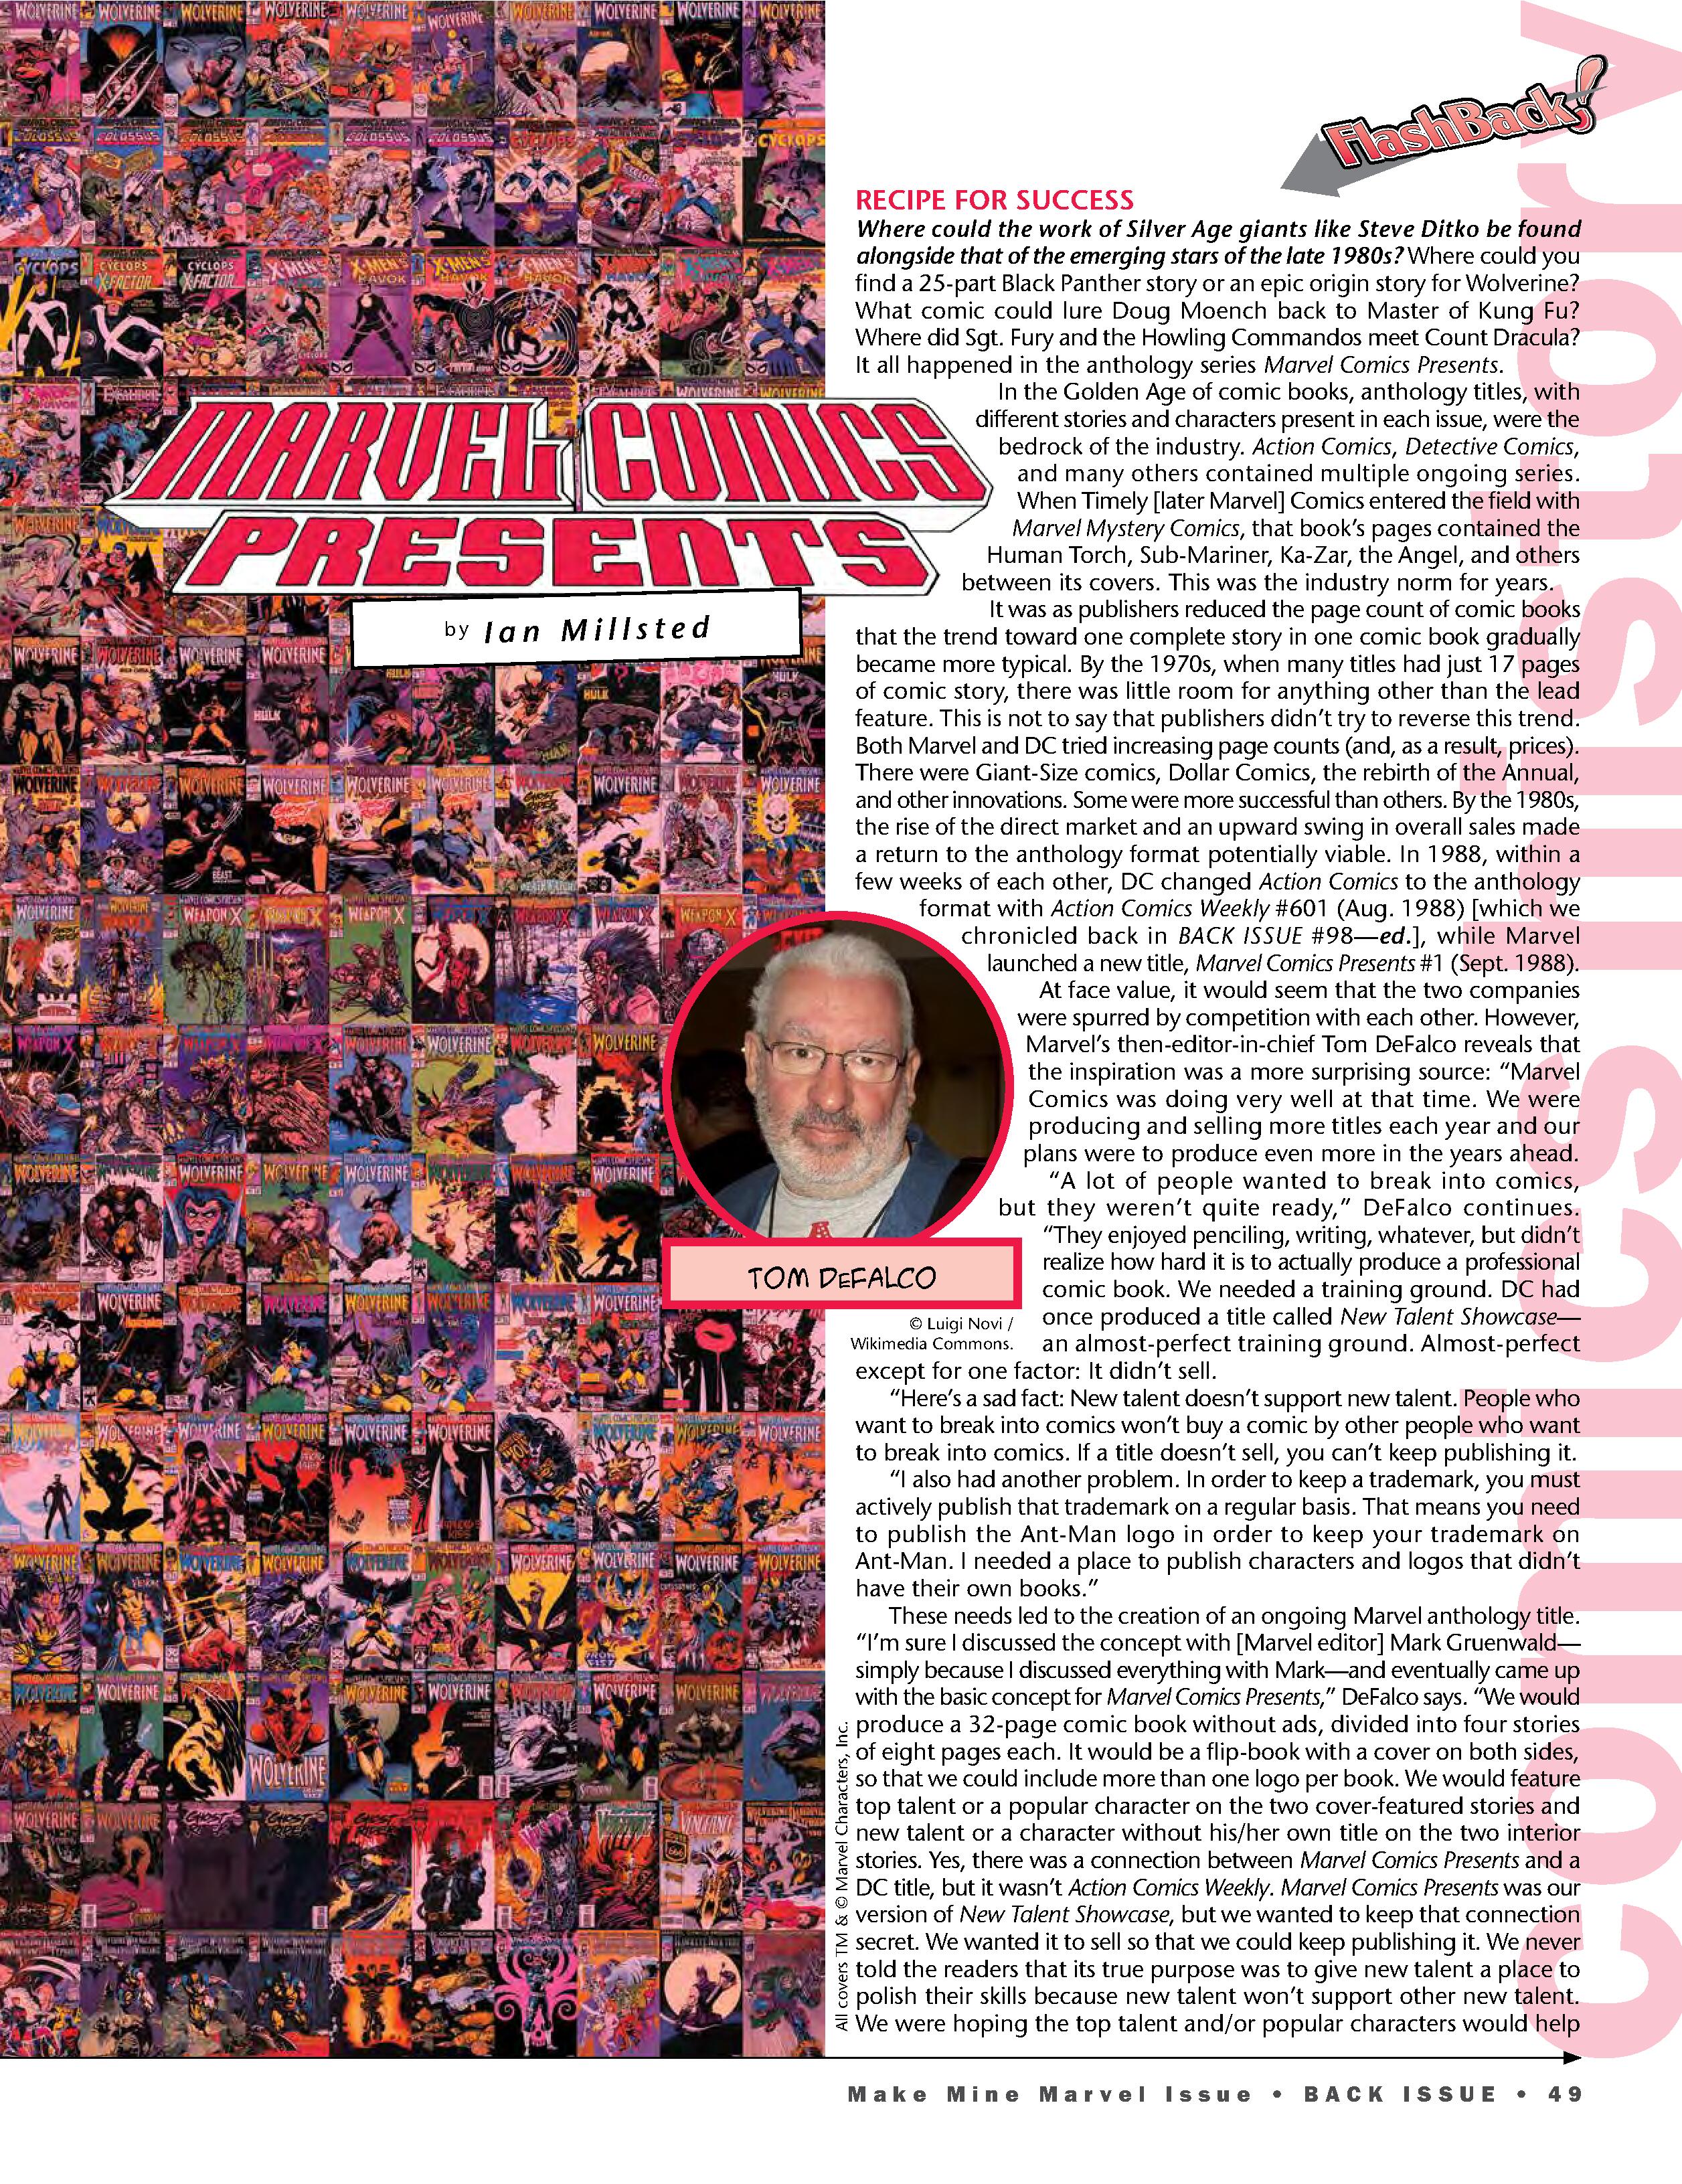 Read online Back Issue comic -  Issue #110 - 51